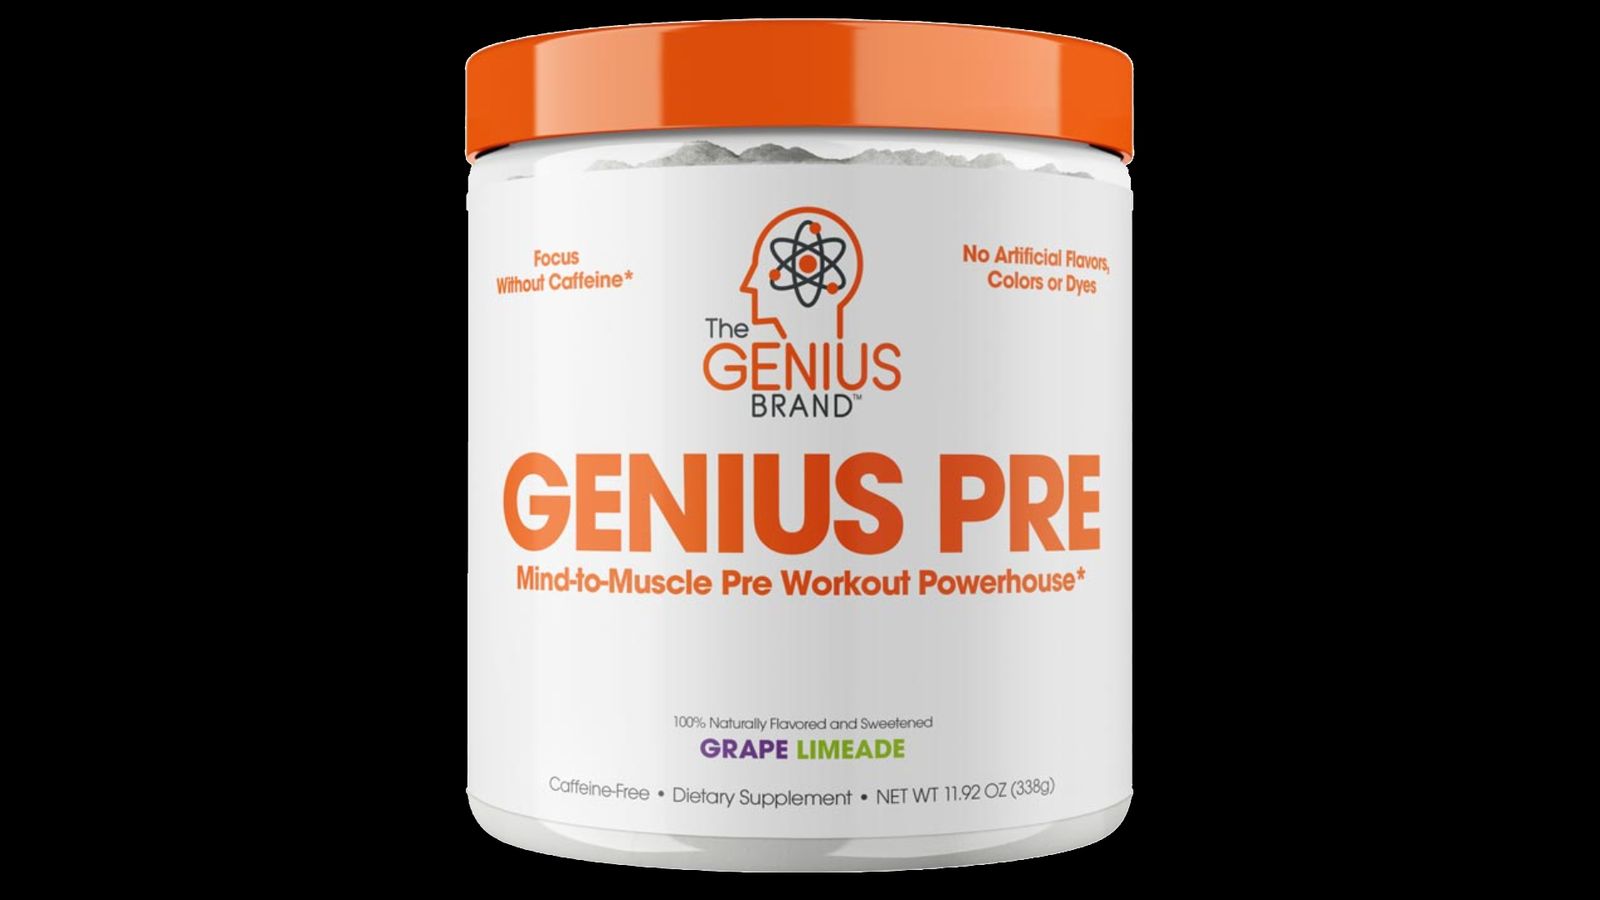 The Genius Brand Genius Pre product image of a white container with orange accents, lid, and labeling